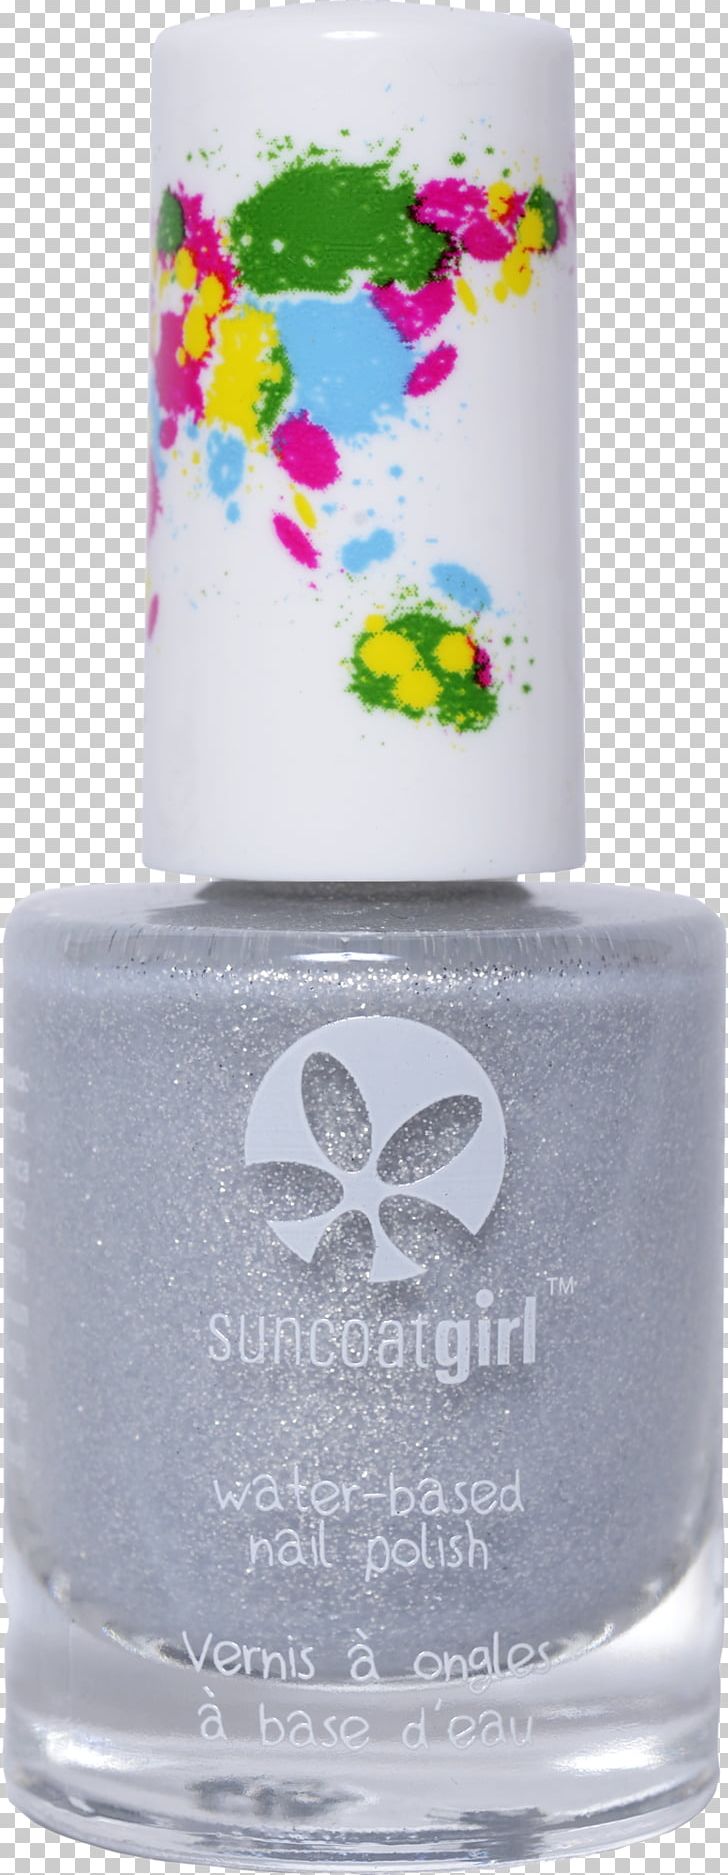 SuncoatGirl Nail Polish Water Varnish Child PNG, Clipart, Accessories, Child, Christian Dior Se, Cosmetics, Estee Lauder Companies Free PNG Download